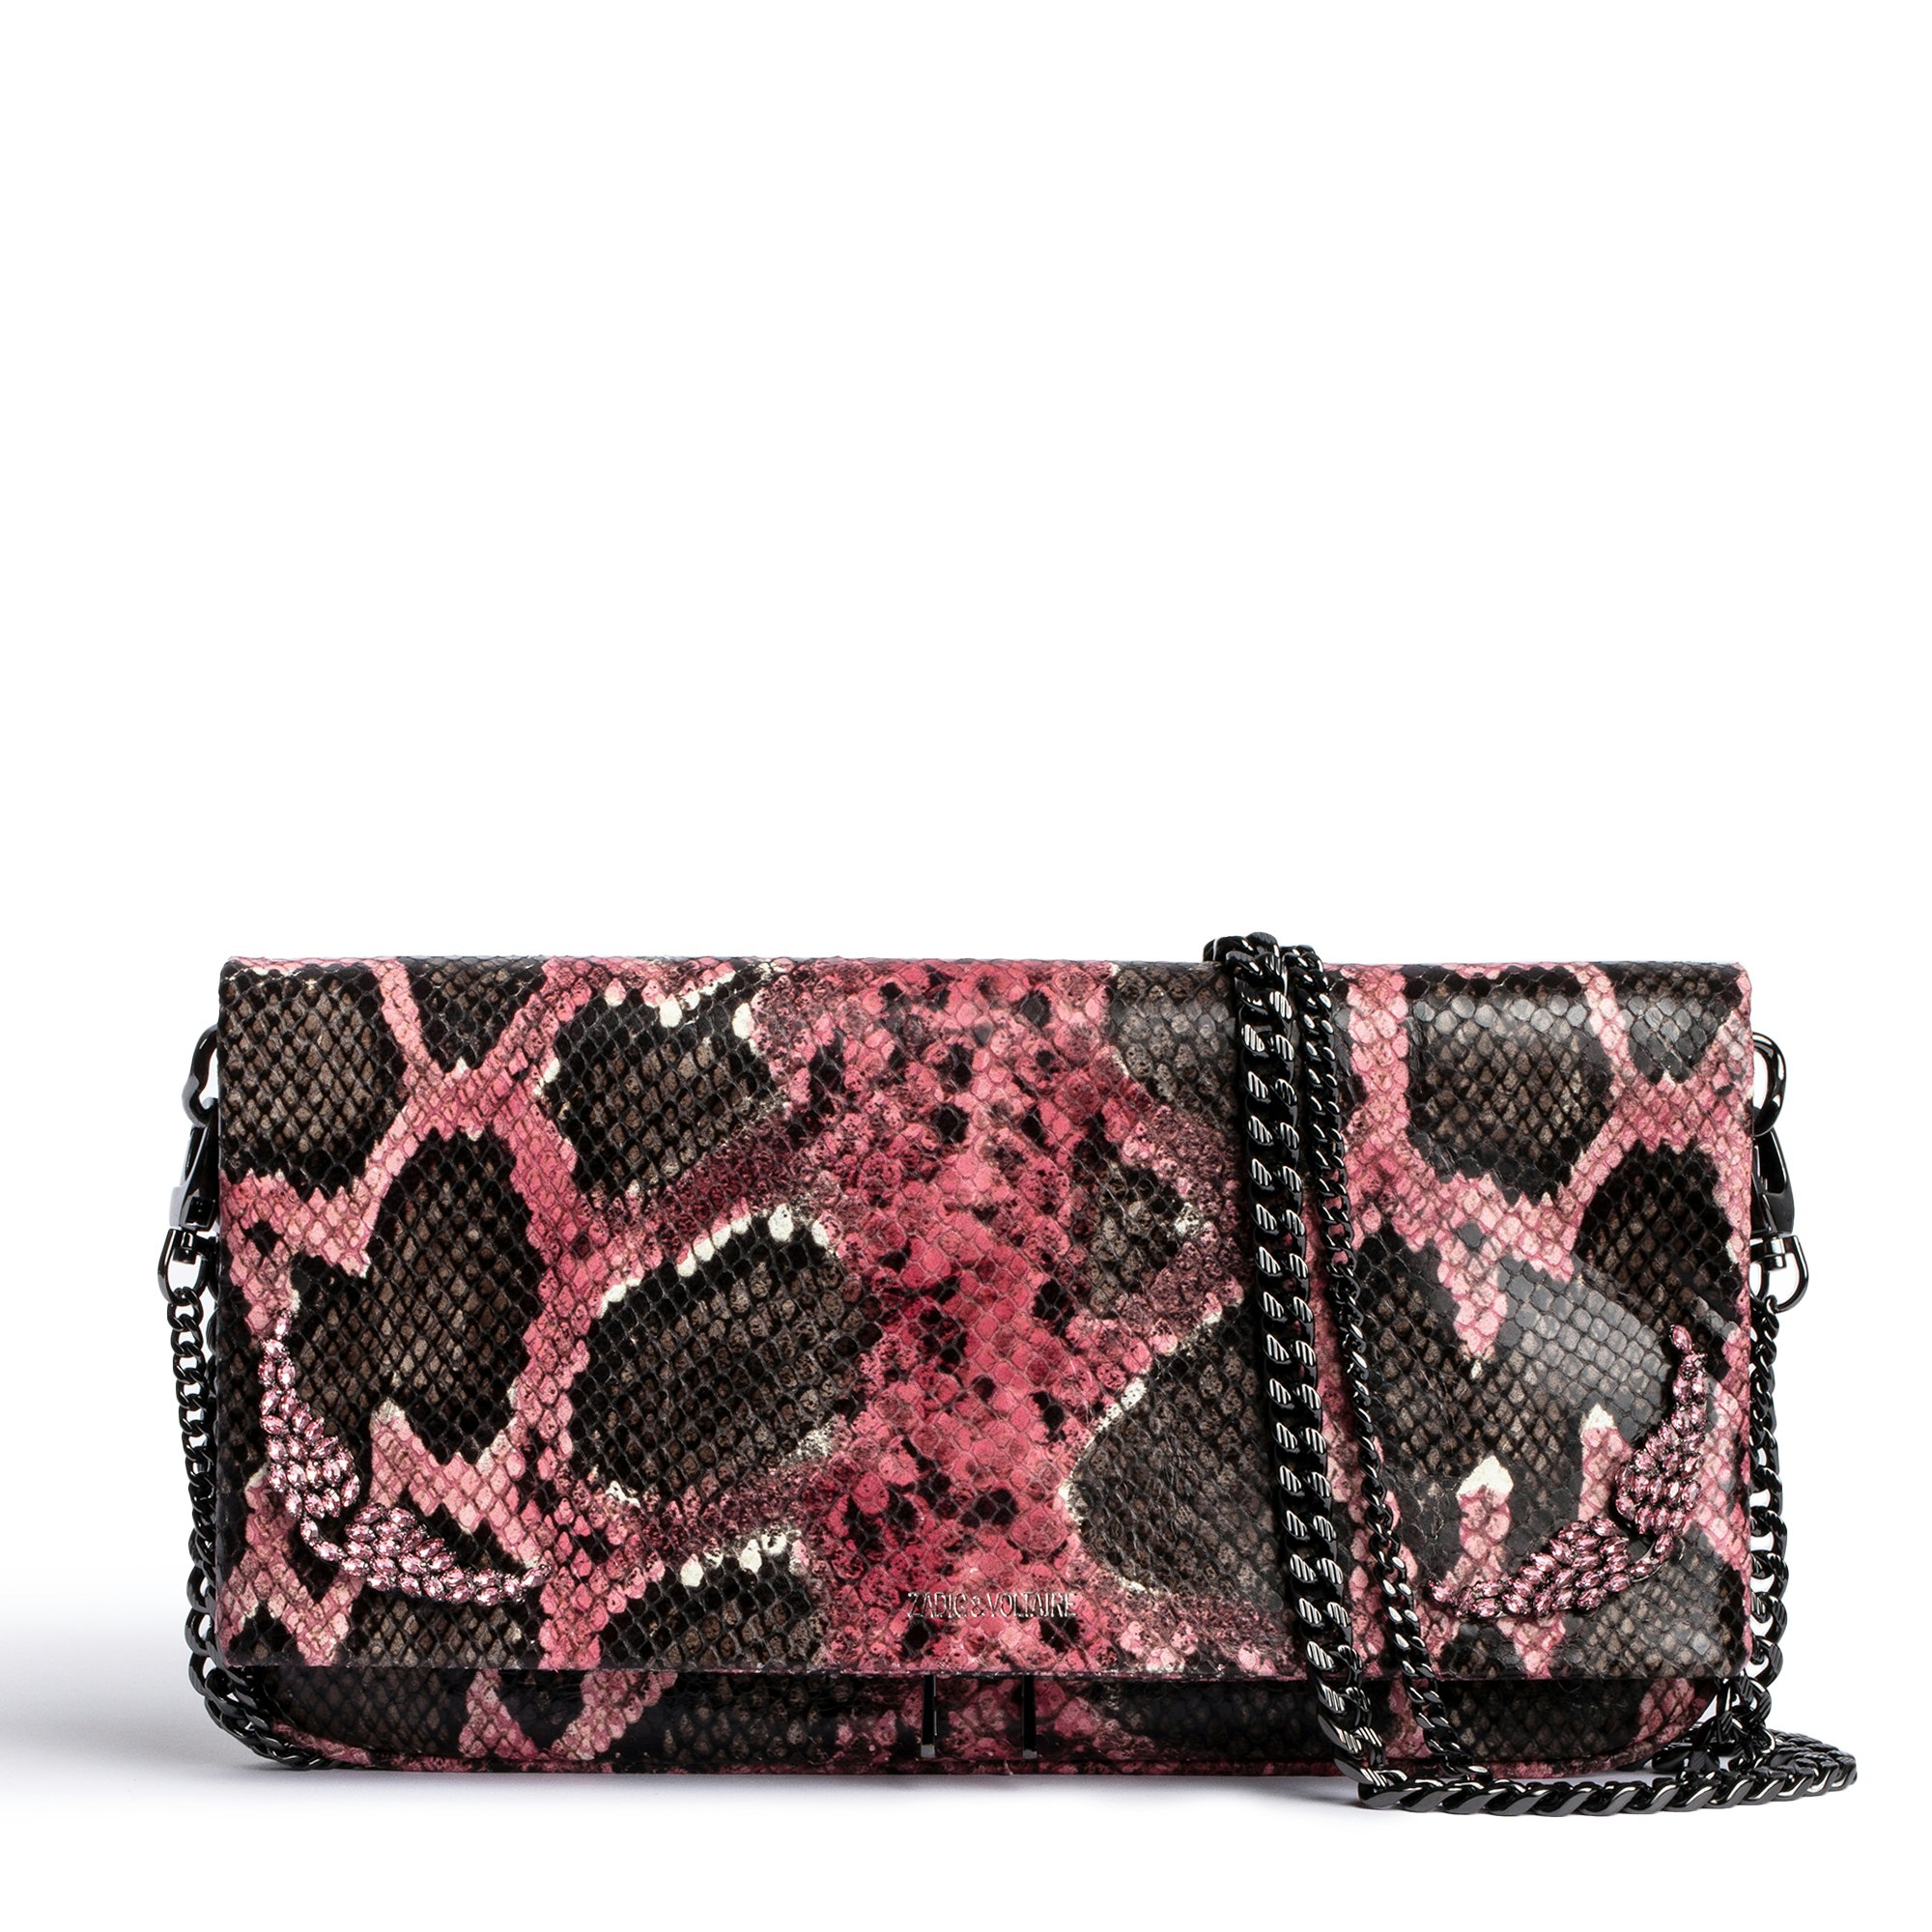 Rock Mirror バッグ Women's purple leather clutch bag with studs and snakeskin effect